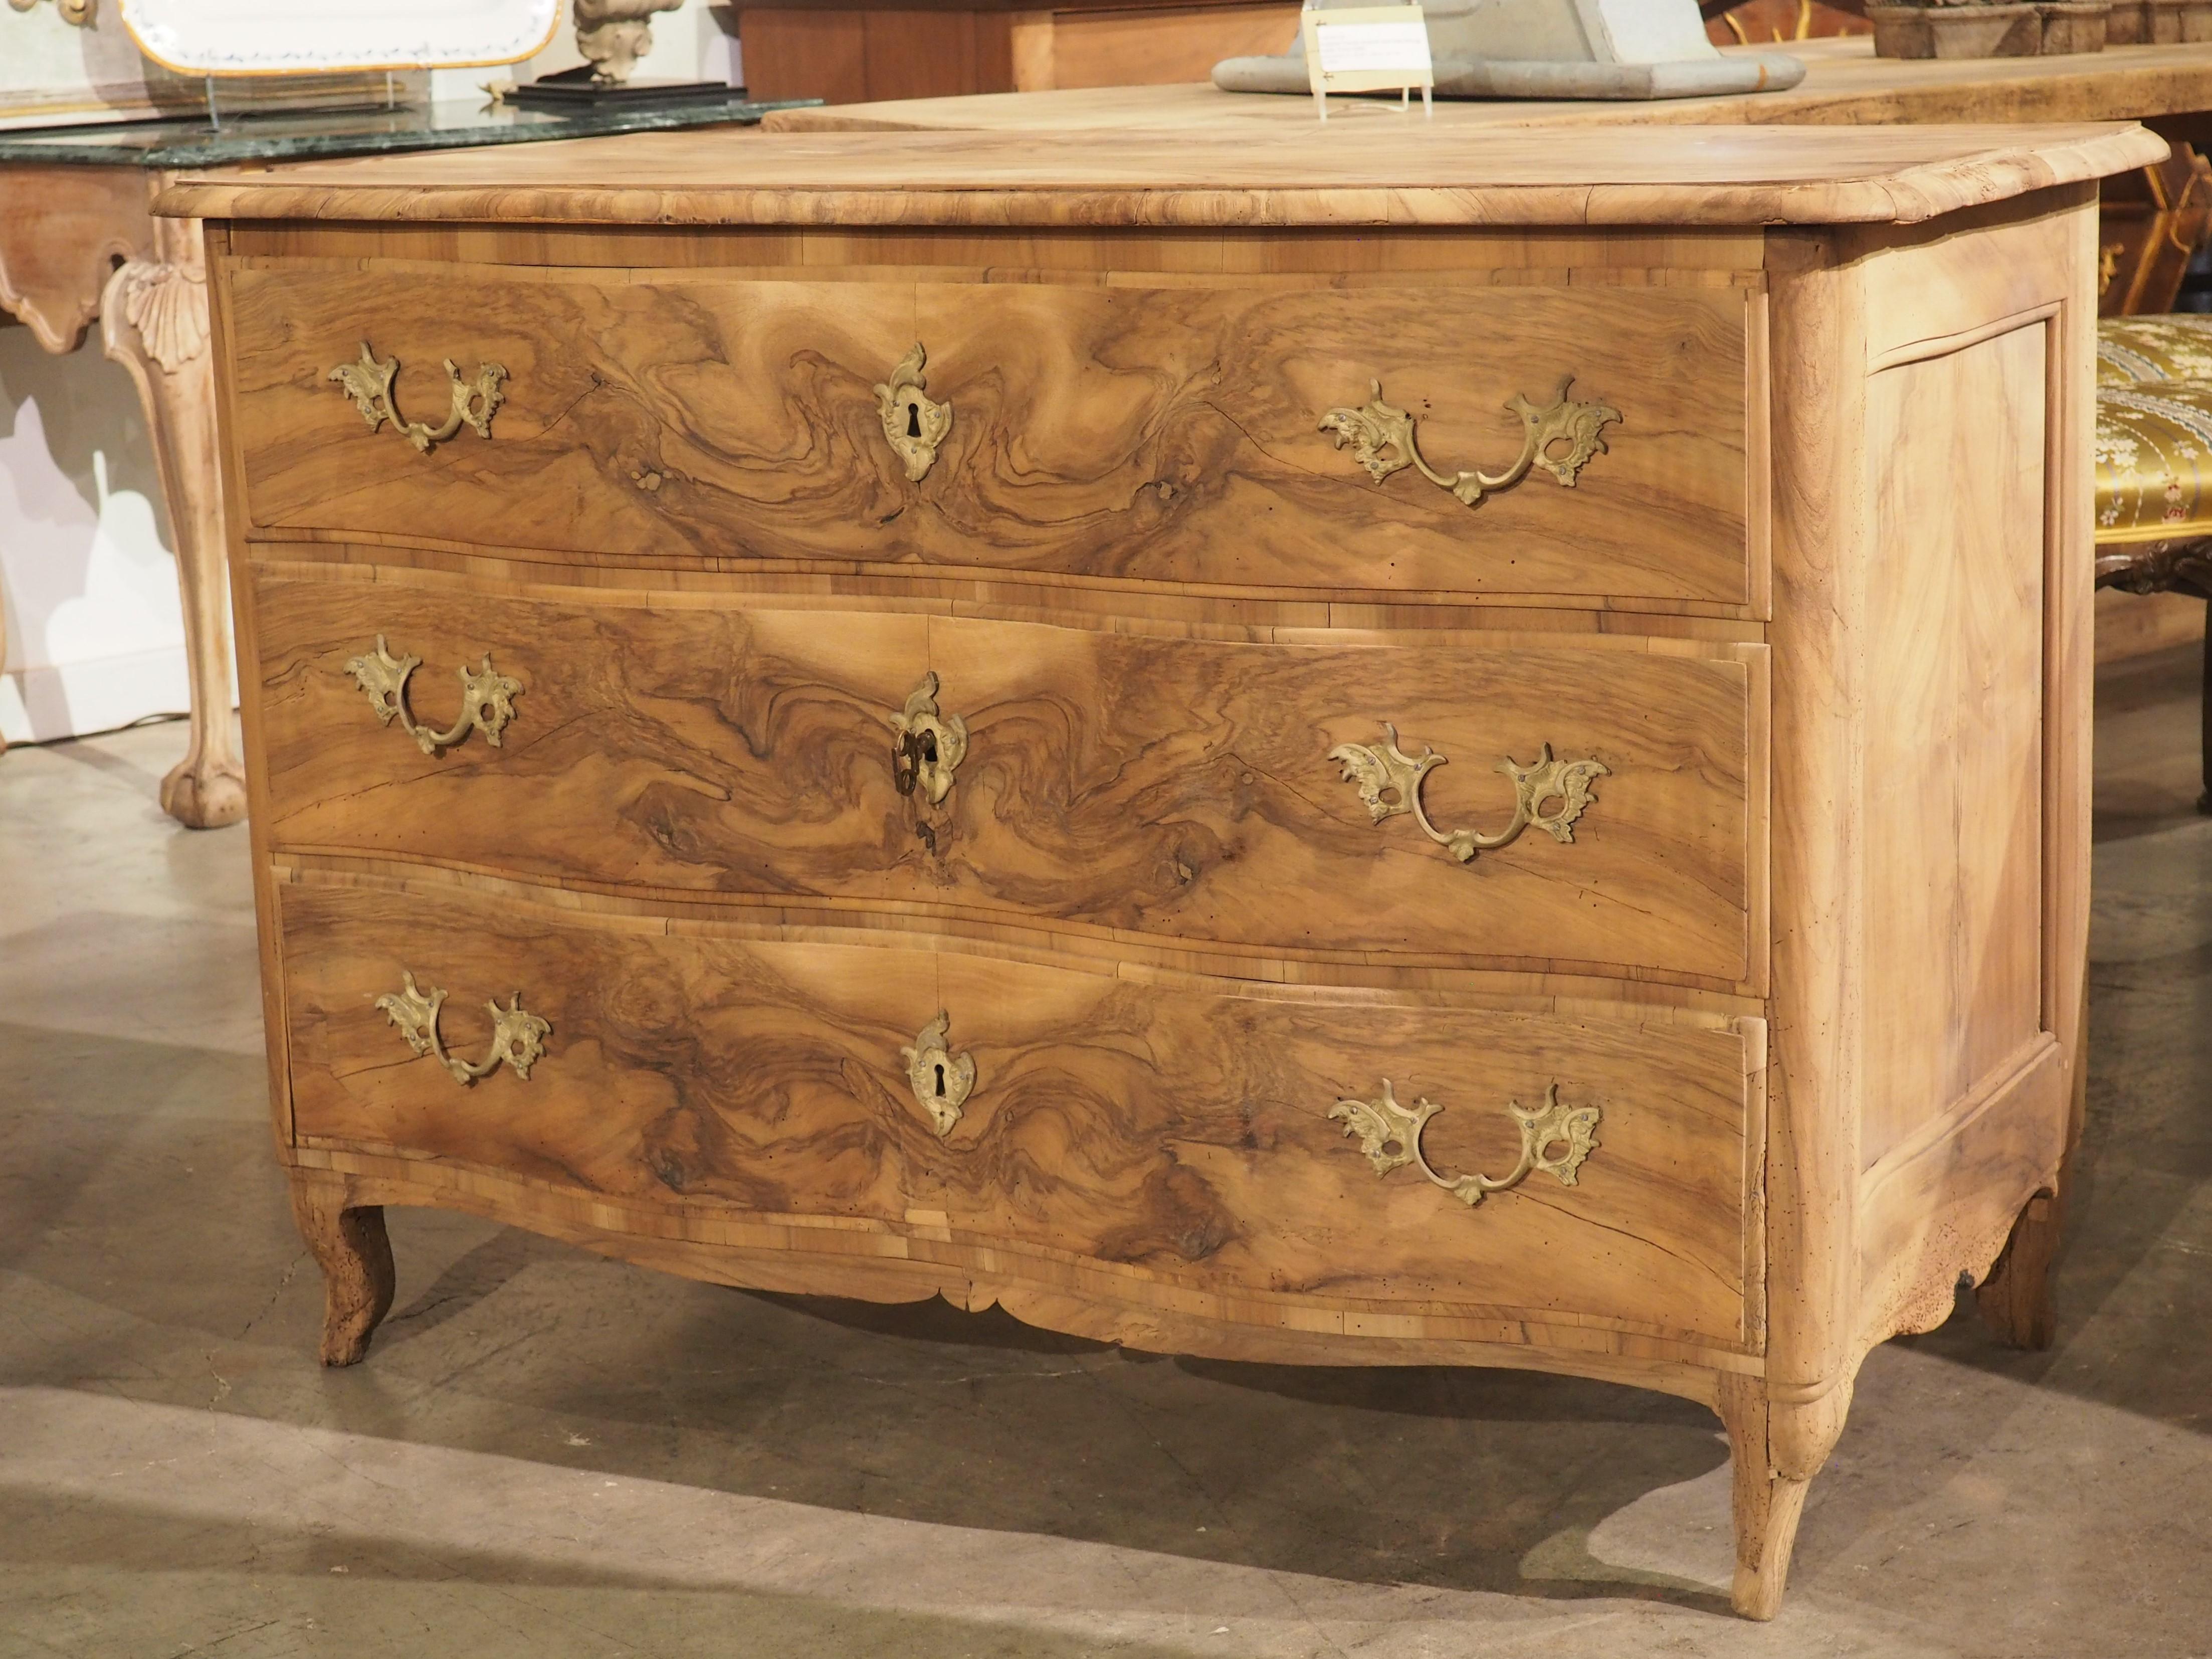 Hand-carved in France in the 1700’s, this arbalete front commode has been bleached at some point, revealing a fascinating burl walnut pattern. The chest of drawers has a warm, light brown color disrupted by the darker tones of the burl, which is